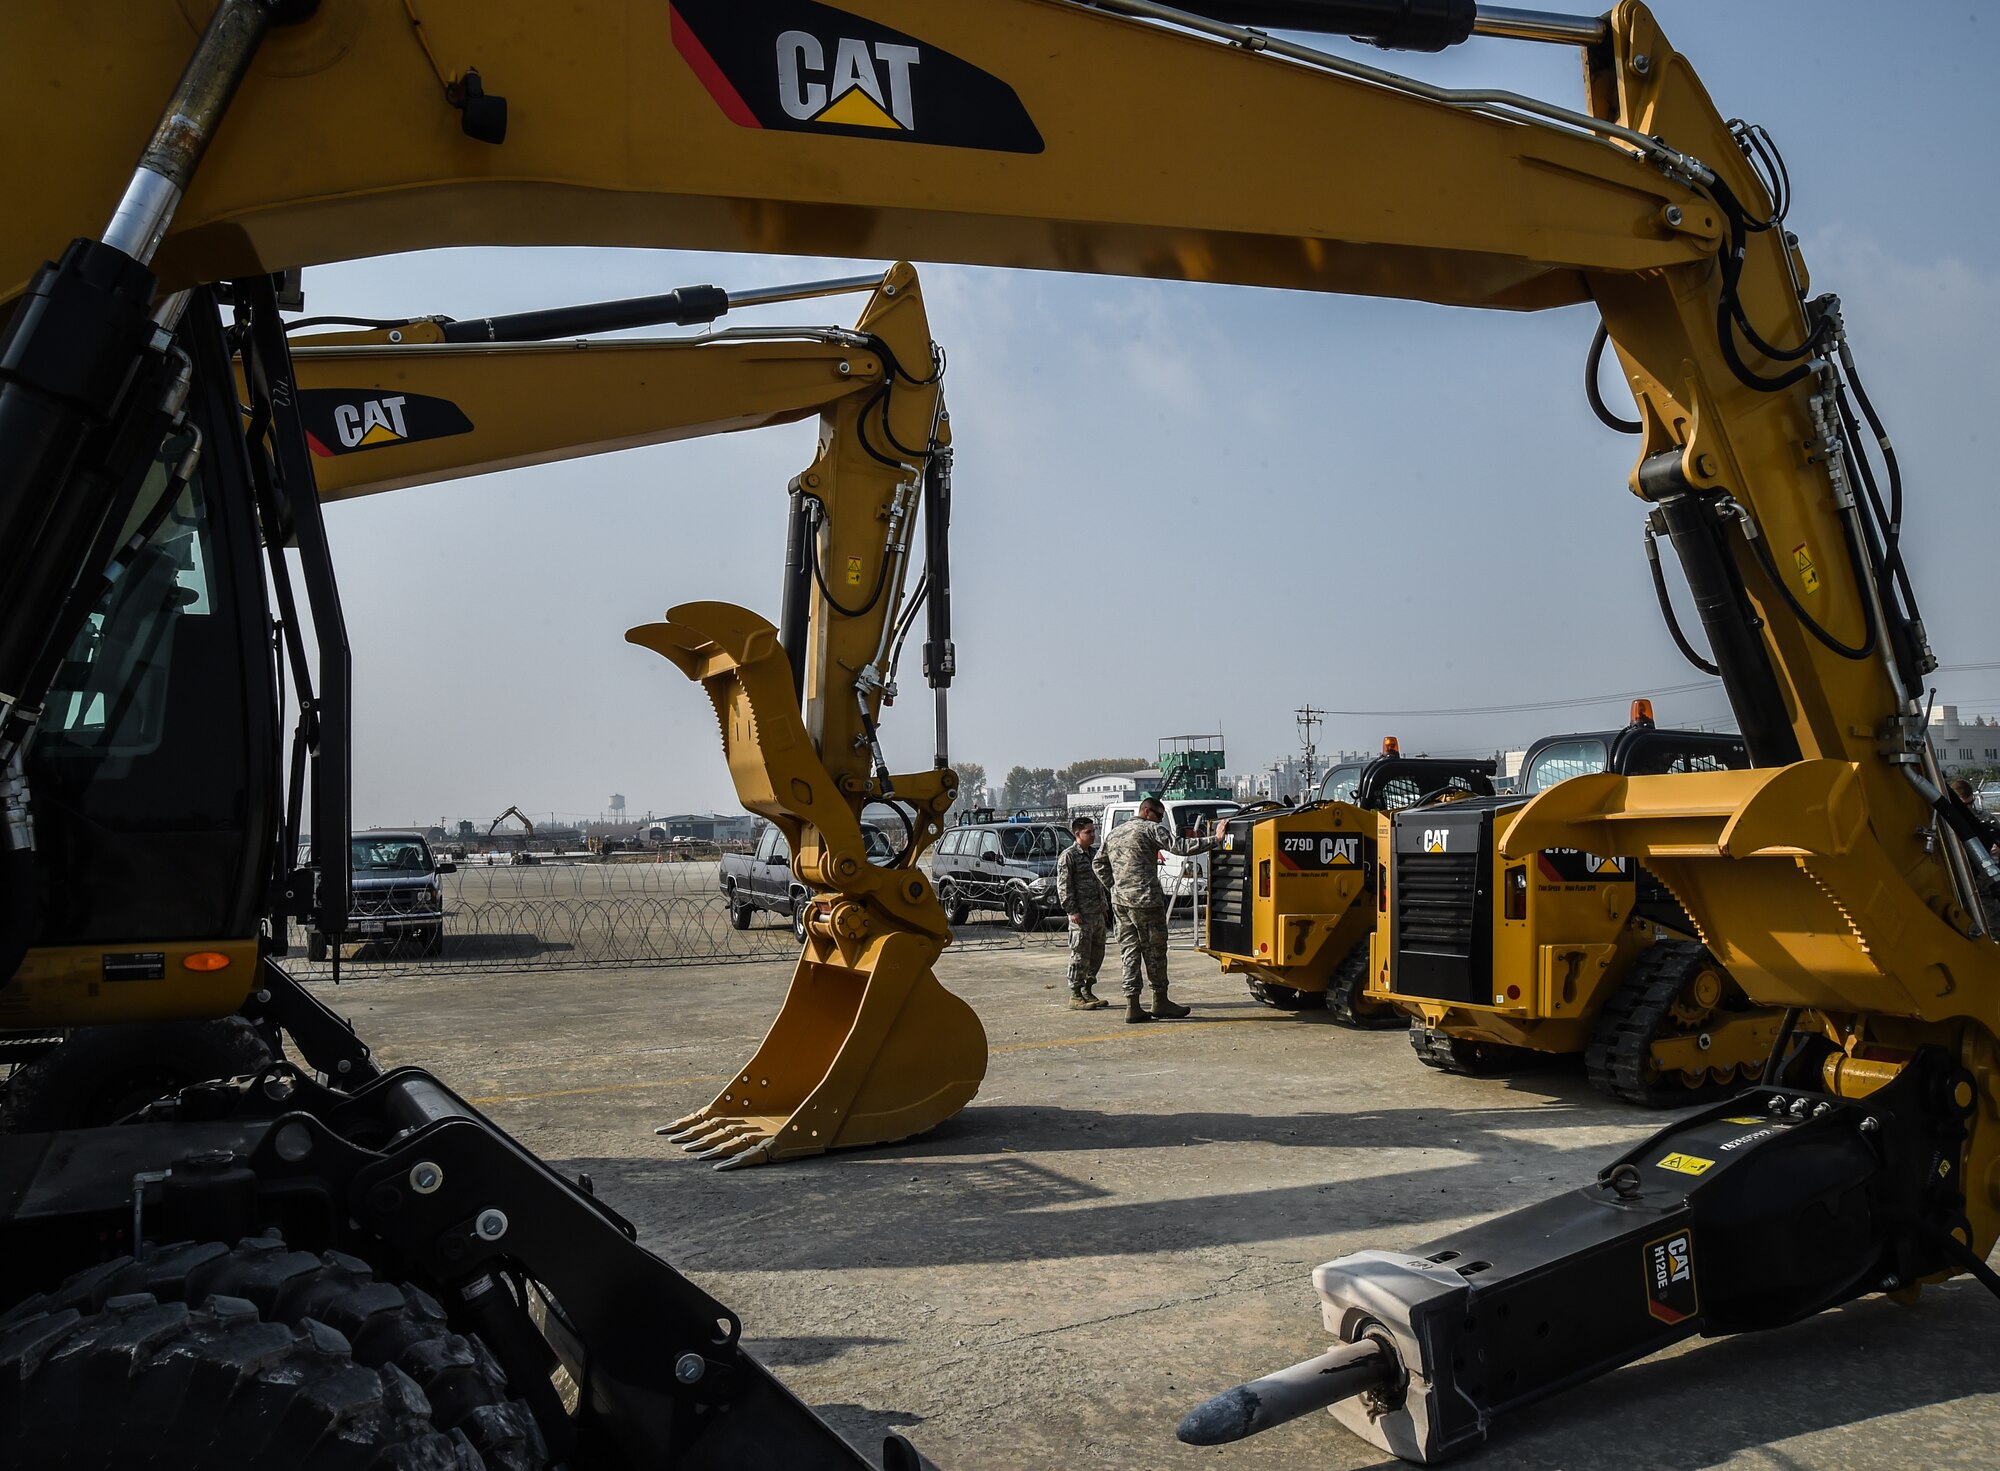 U.S. Air Force Airmen examine heavy machinery during a Rapid Airfield Damage Repair bilateral training exercise at Gwangju Air Base, Republic of Korea, Nov. 8, 2017. U.S. and R.O.K. Airmen trained together for a week to learn the new RADR process, preparing them for response to wartime contingencies, enhancing interoperability and building partnership capacity in the Indo-Asia Pacific region. The new process makes use of rapid-setting concrete which enables vehicles to pass over it after one hour and any aircraft within two hours. (U.S. Air Force photo by Senior Airman Curt Beach)